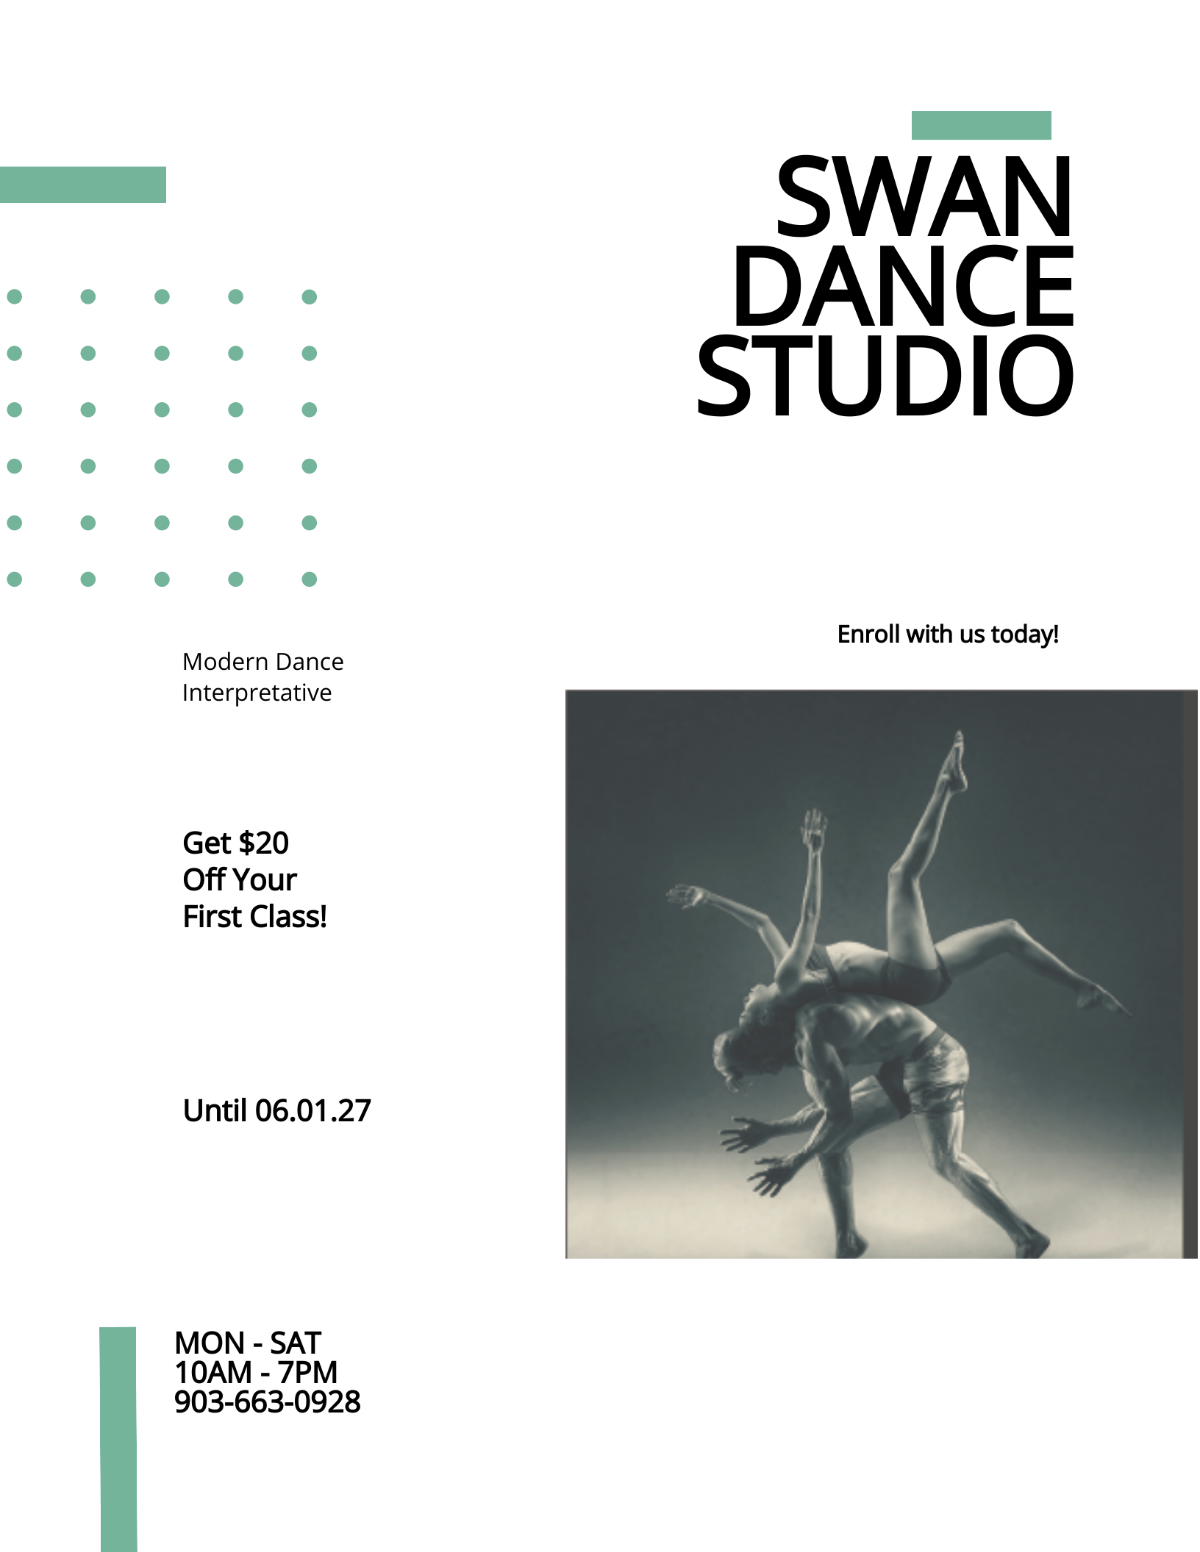 Dance Lesson And Studio Flyer Template